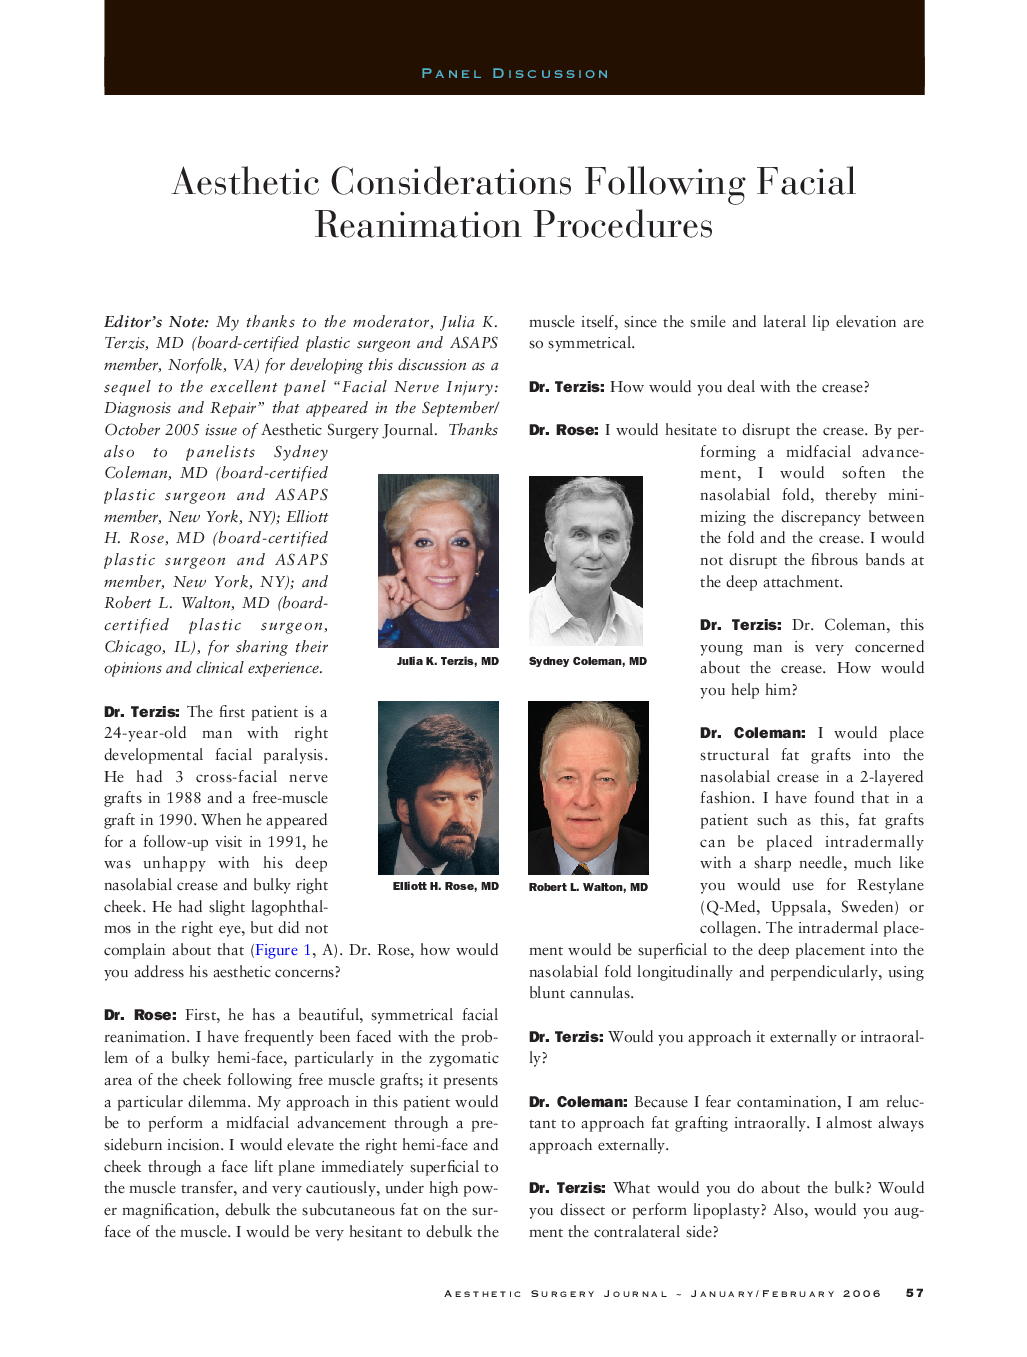 Aesthetic considerations following facial reanimation procedures